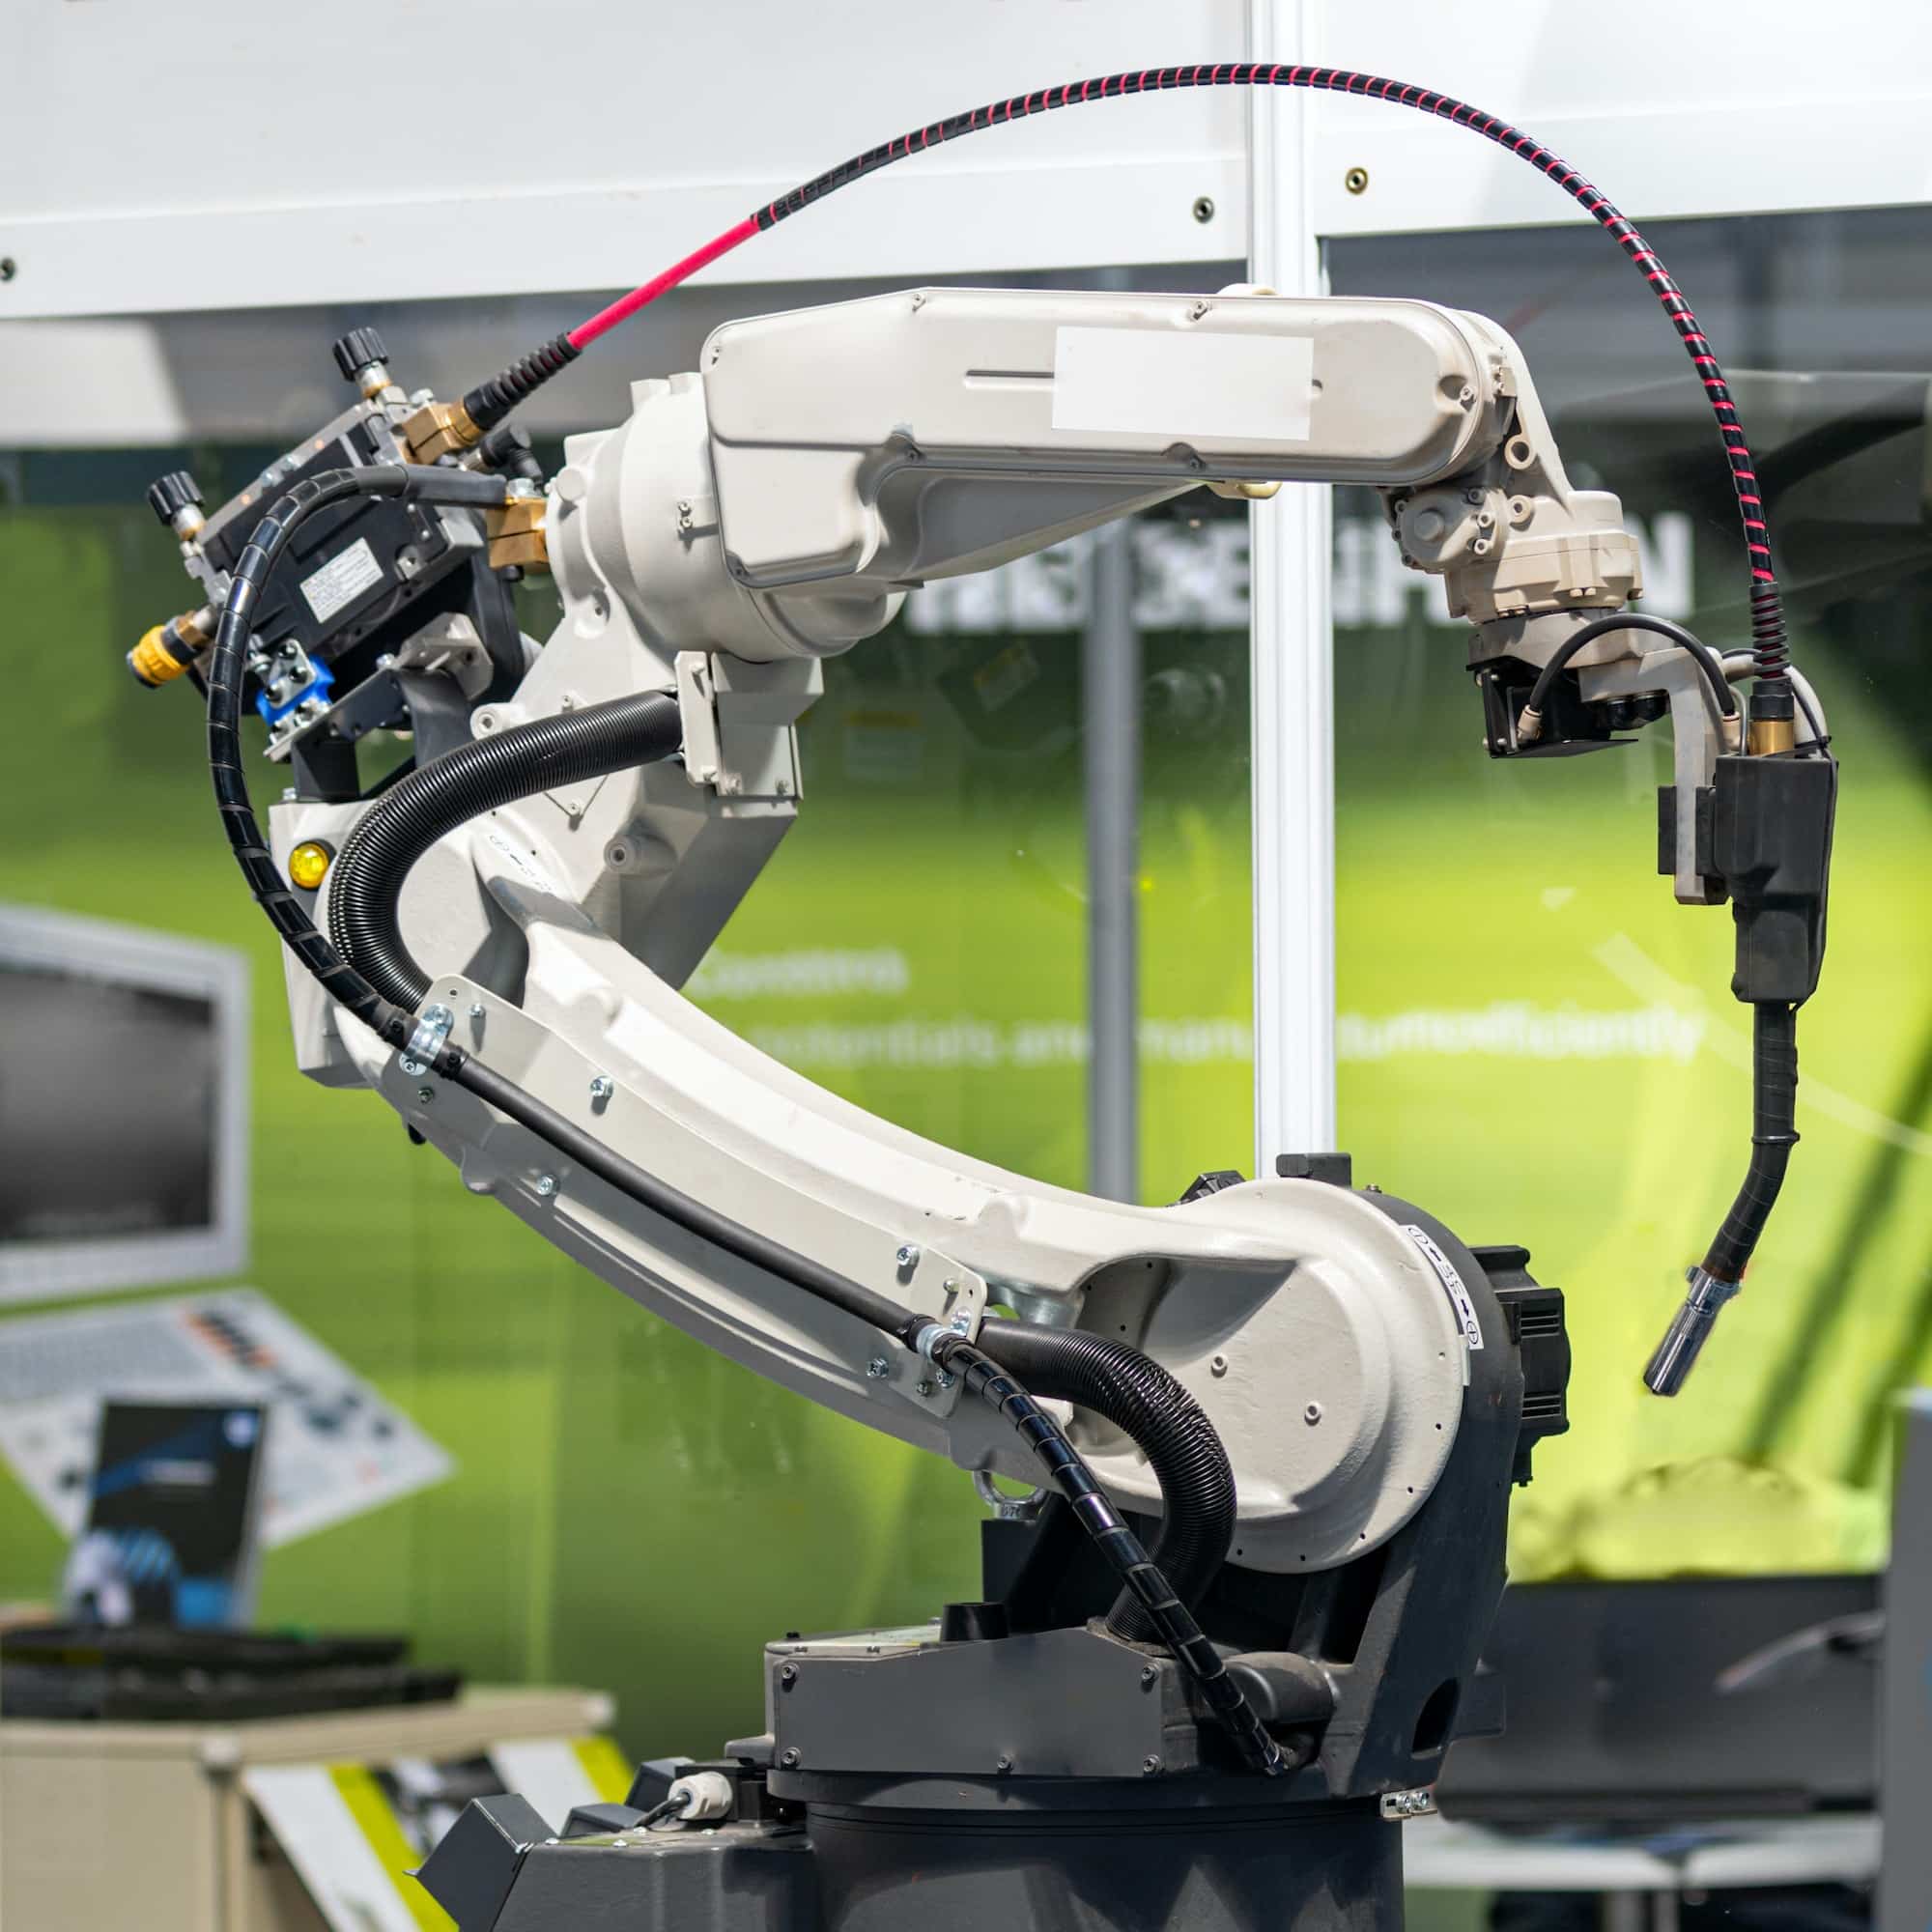 Robotic arm welding system in a manufacturing production plant